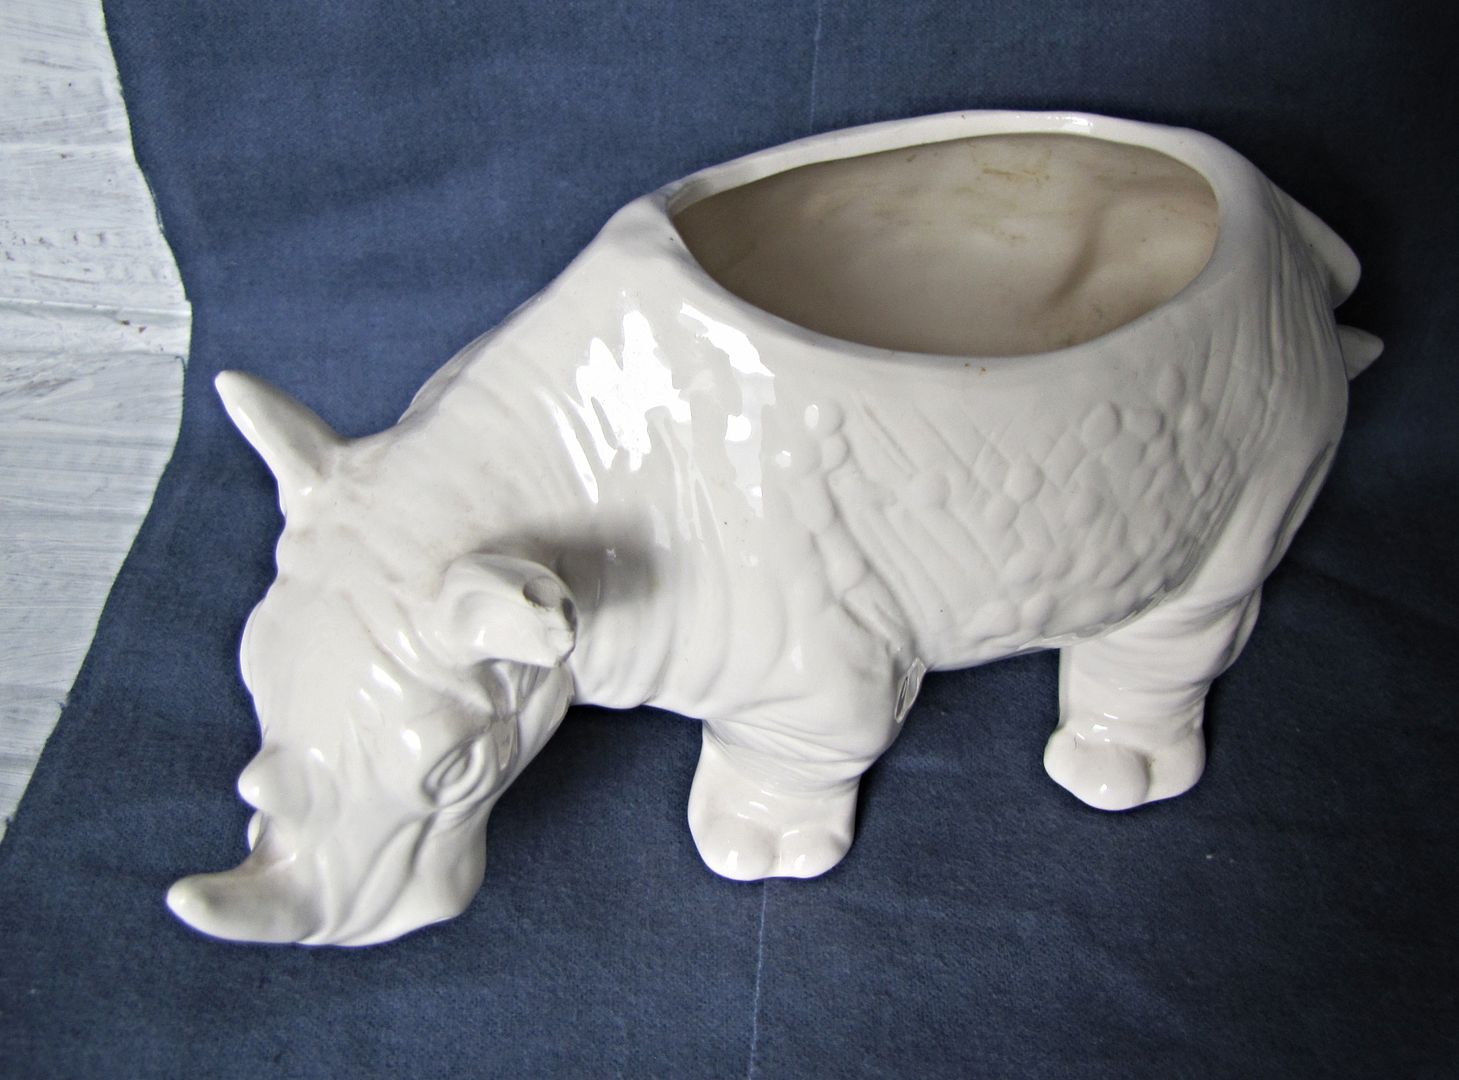 rhino pincushion from floral container - Indietutes.blogspot.com photo ee8f4c26-4c3e-4f4c-a618-1e21b0a89cea.jpg